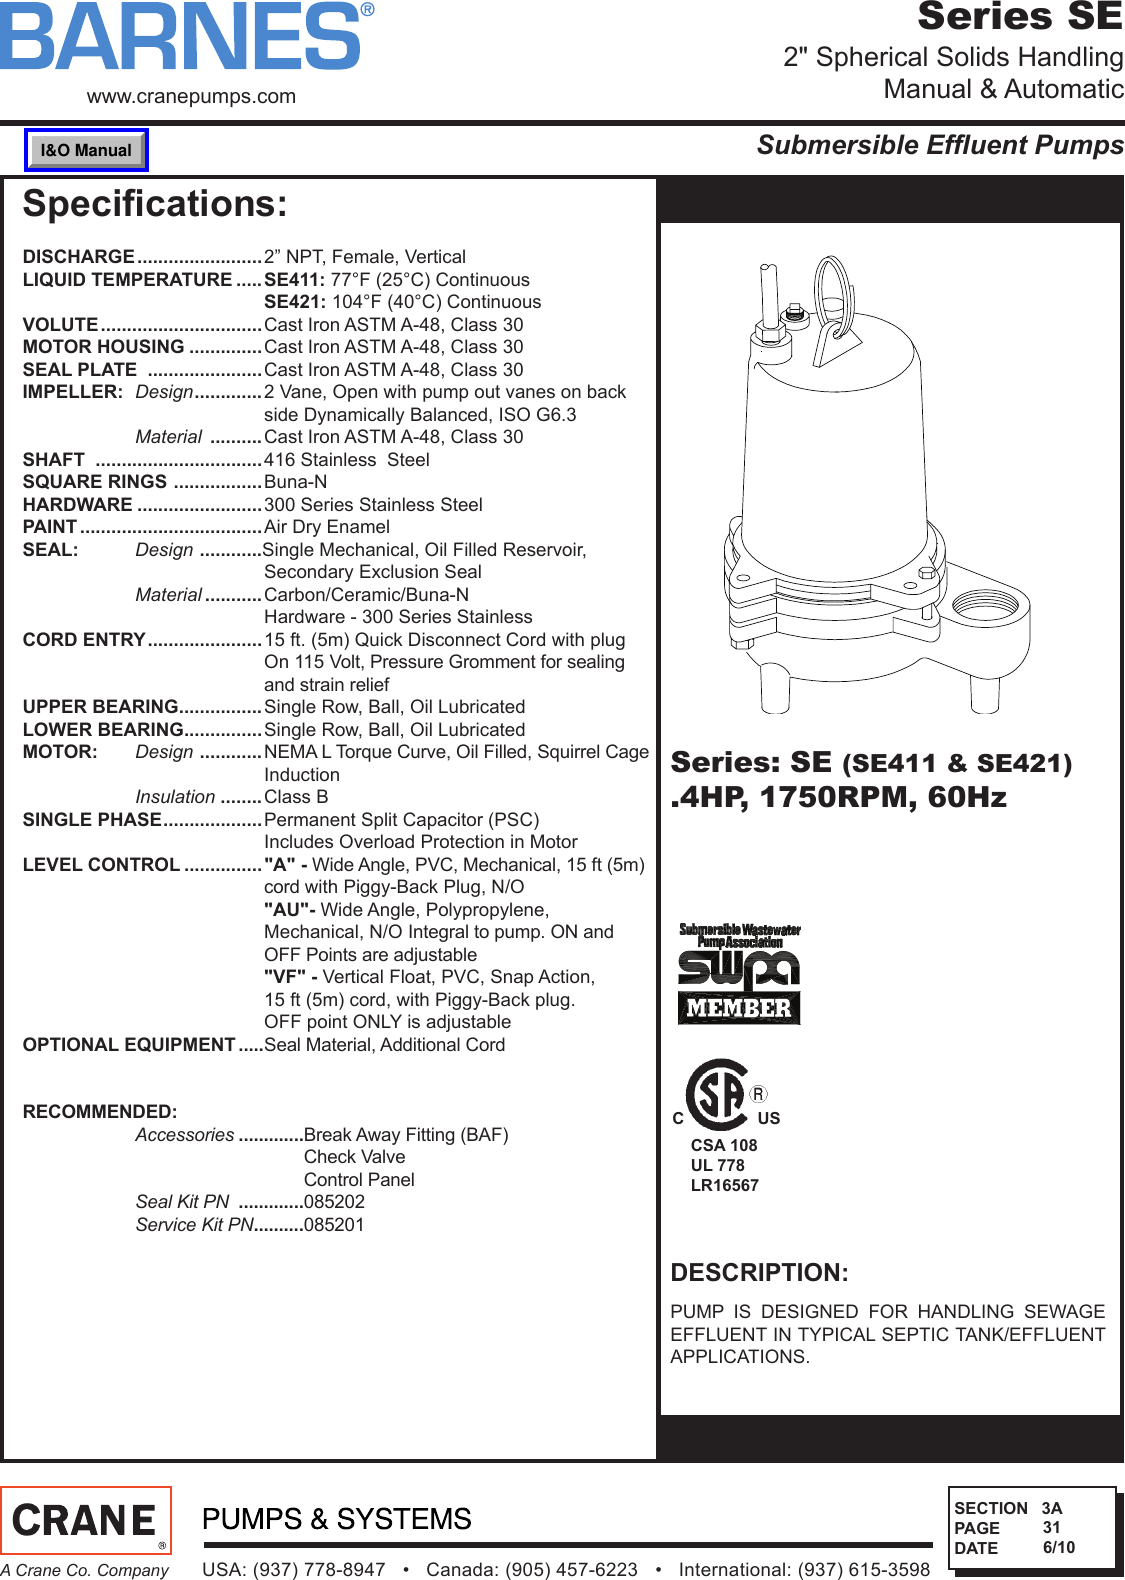 Page 1 of 3 - 534520 1 Barnes Se Series Submittal Sec-3a User Manual